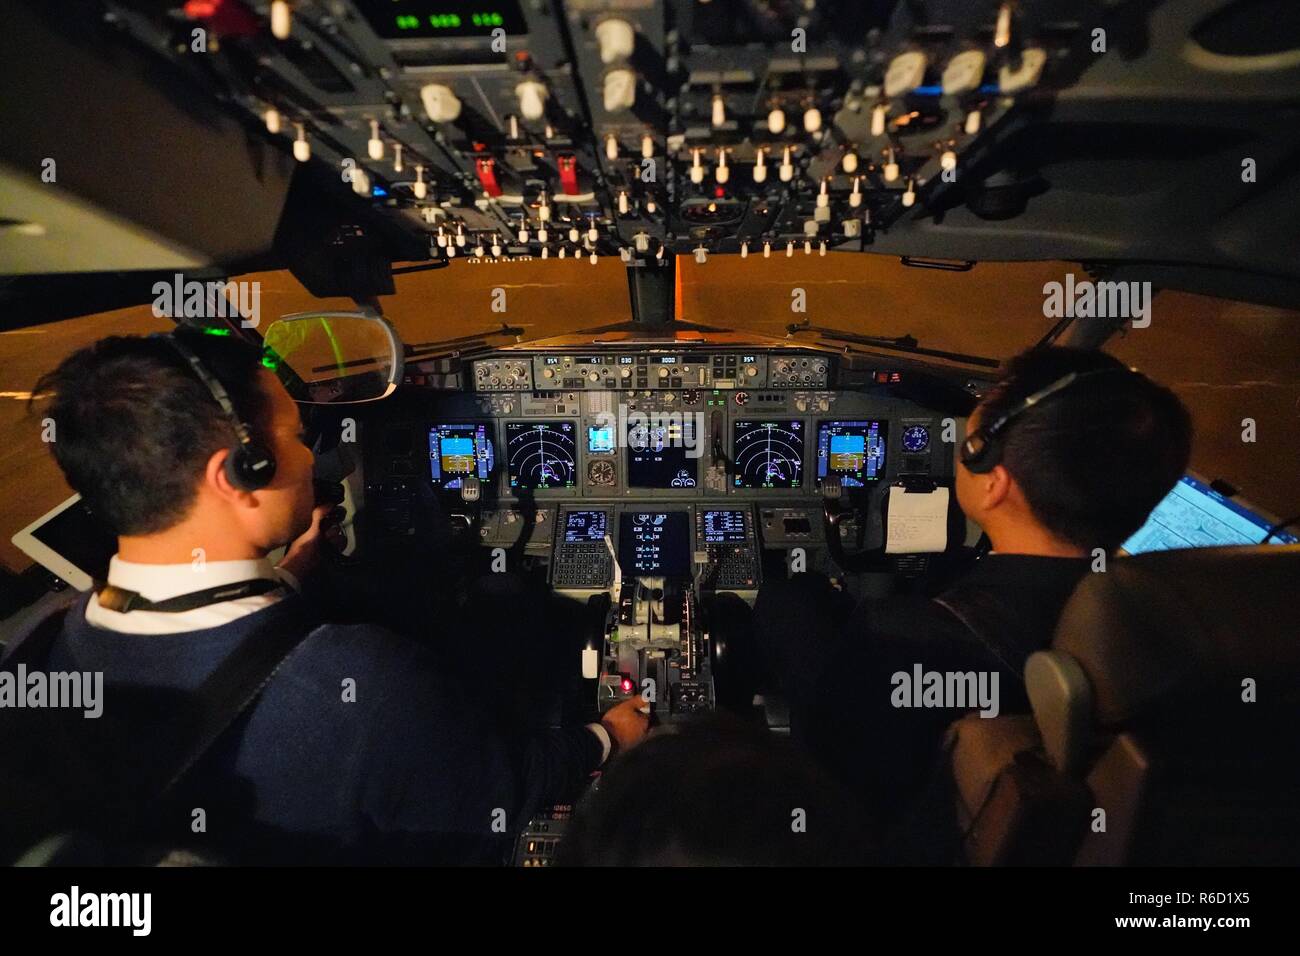 (181205) -- BEIJING, Dec. 5, 2018 (Xinhua) -- Gao Yujie (L) and Yuan Biao, captains of the Shandong Airlines, prepare for a verification takeoff of a Boeing B738 at Capital International Airport in Beijing, capital of China, Dec. 4, 2018. The Civil Aviation Administration of China (CAAC) on Tuesday made the first verification takeoff based on the Head Up Display (HUD) under Runway Visual Range (RVR) of 90-meter low visibility. The success of the takeoff symbolized that 80 percent of difficulties relating to the low-visibility takeoff will be solved, which can further guarantee the regularity o Stock Photo